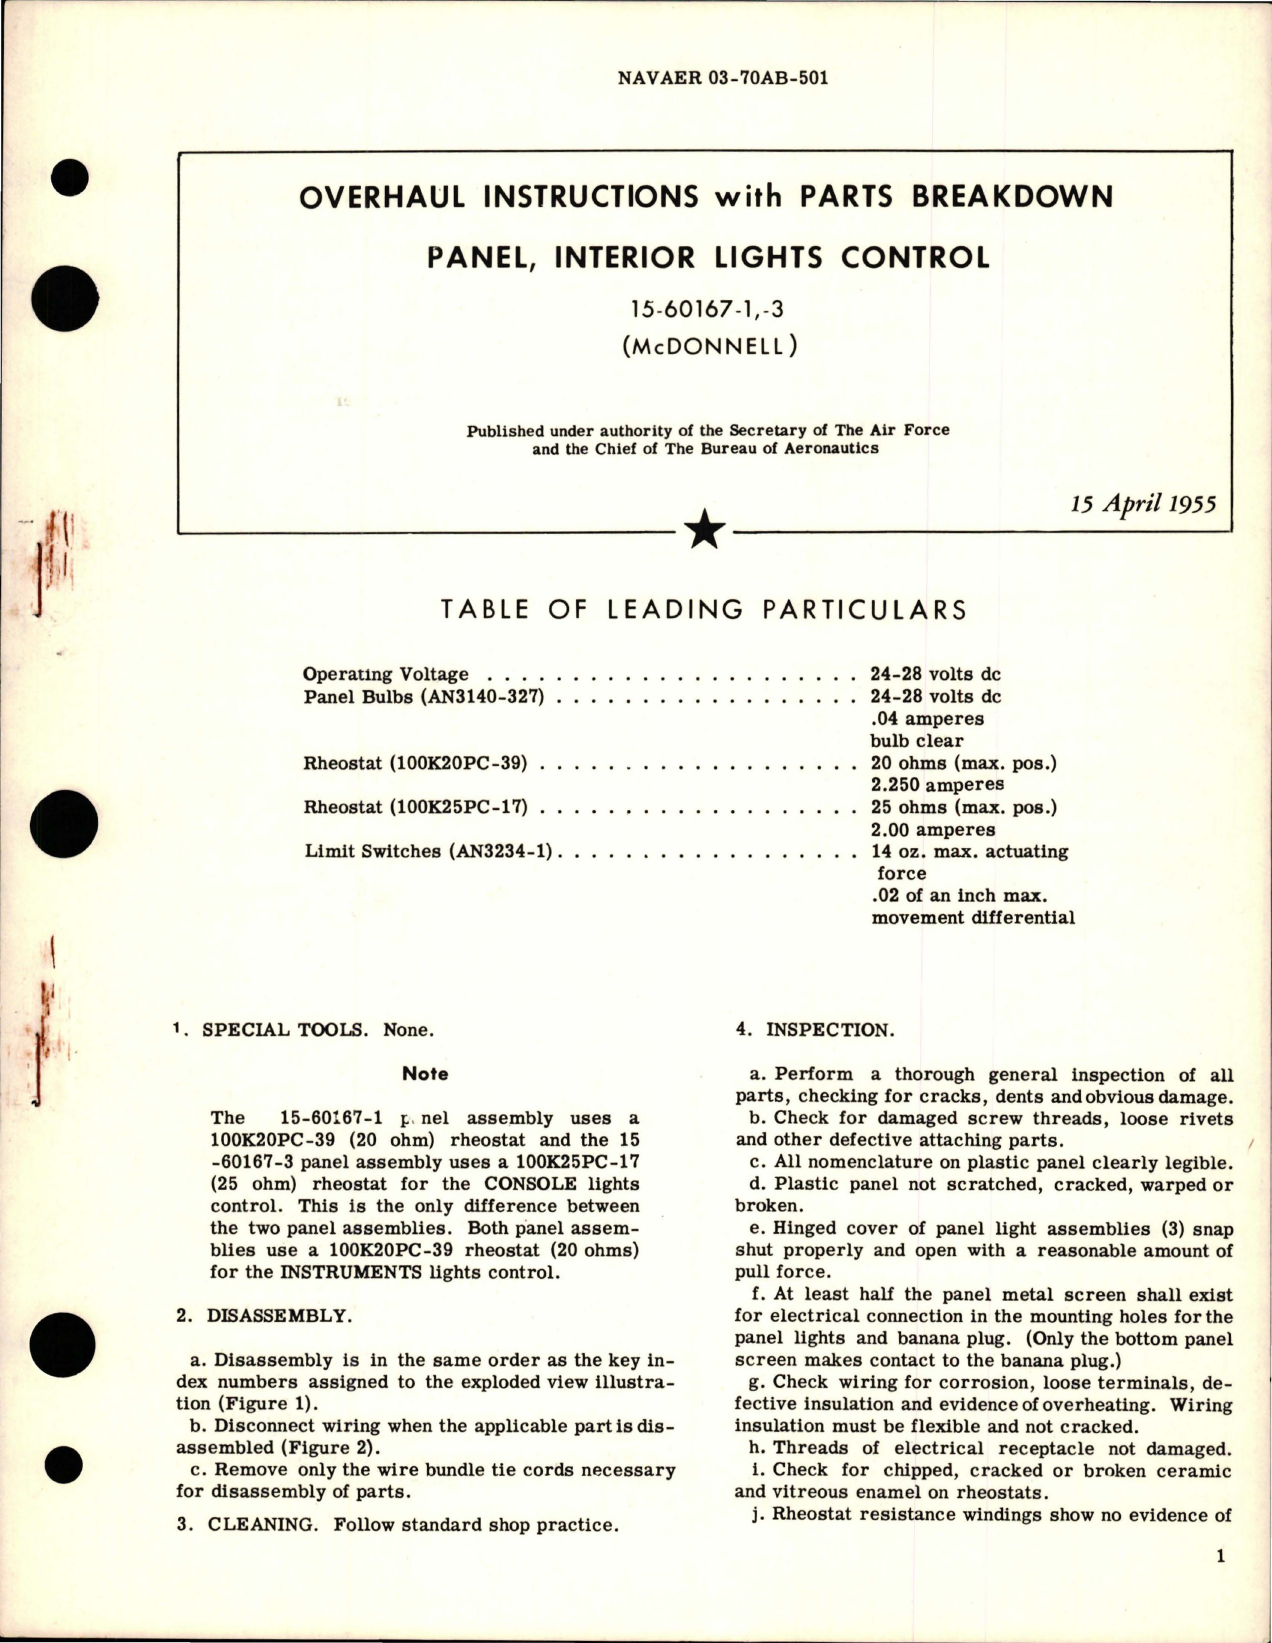 Sample page 1 from AirCorps Library document: Overhaul Instructions with Parts Breakdown for Interior Lights Control Panel - 15-60167-1 and 15-60167-3